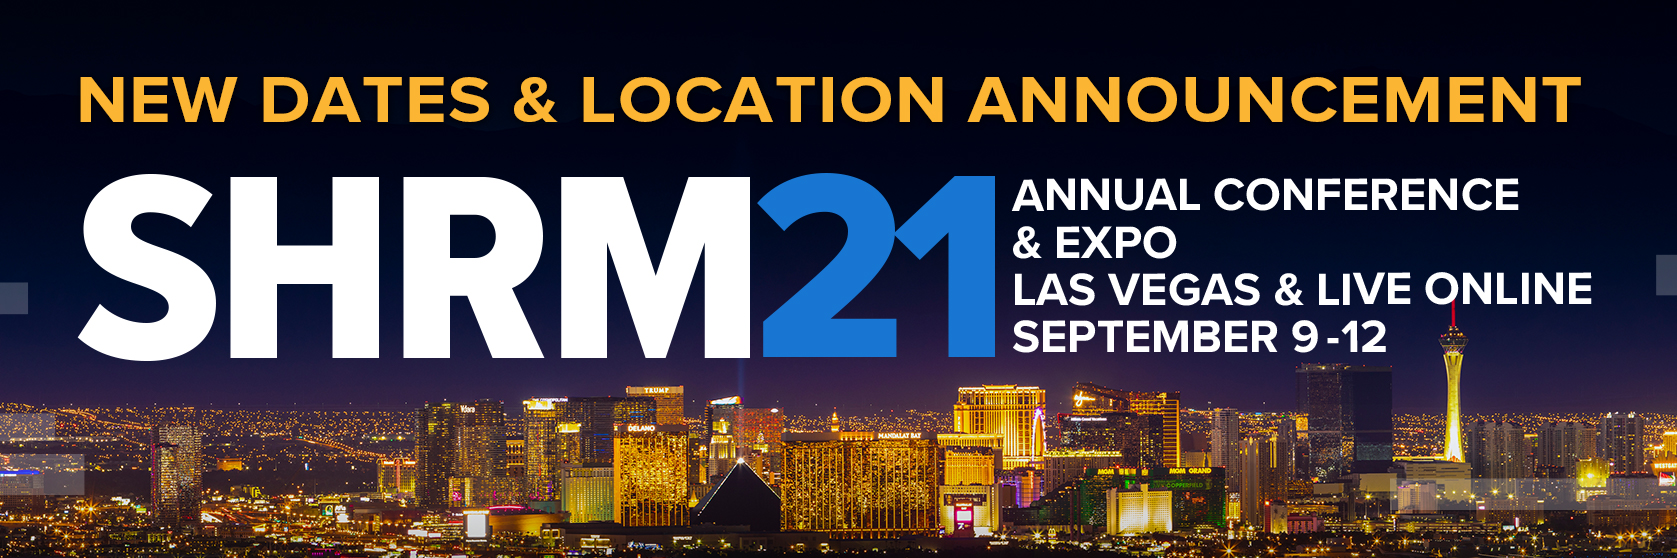 SHRM21 New Dates and Location